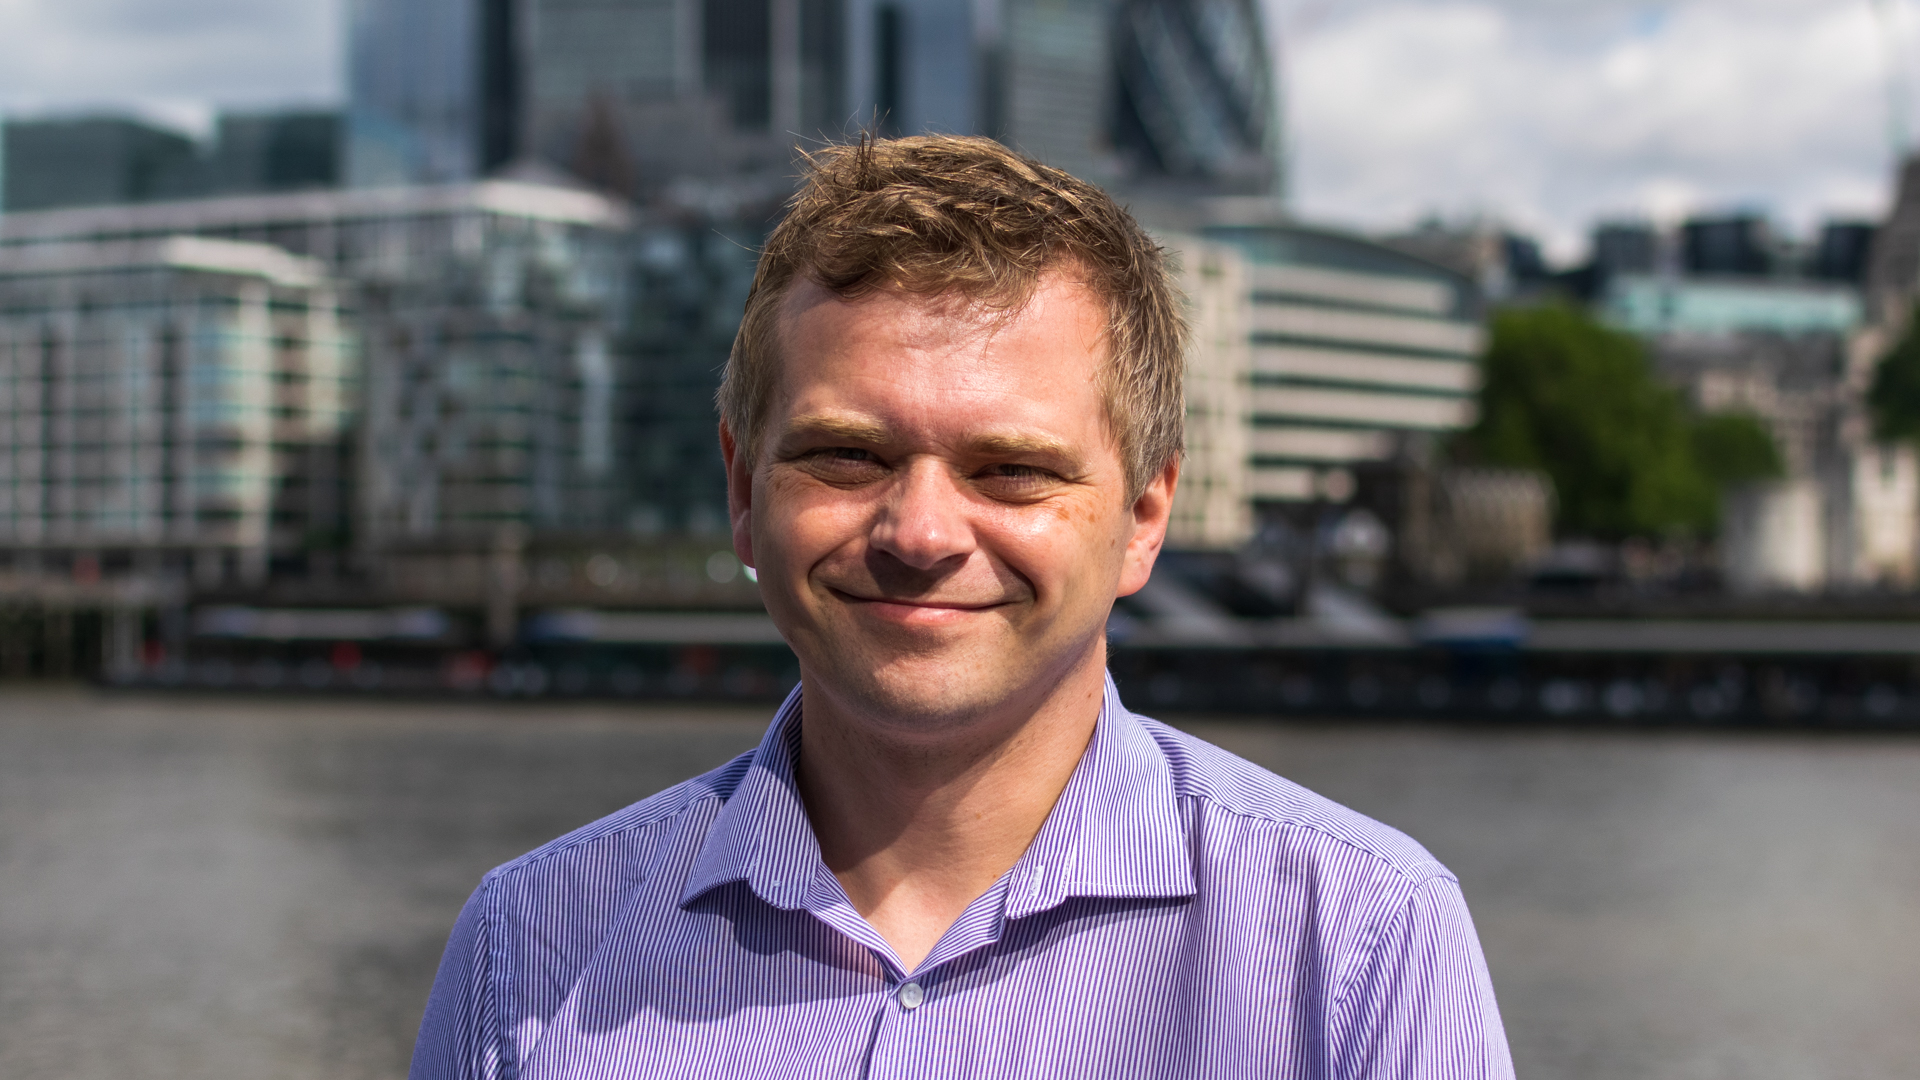 A head and shoulders image of Glyn Cridland with the London backdrop.